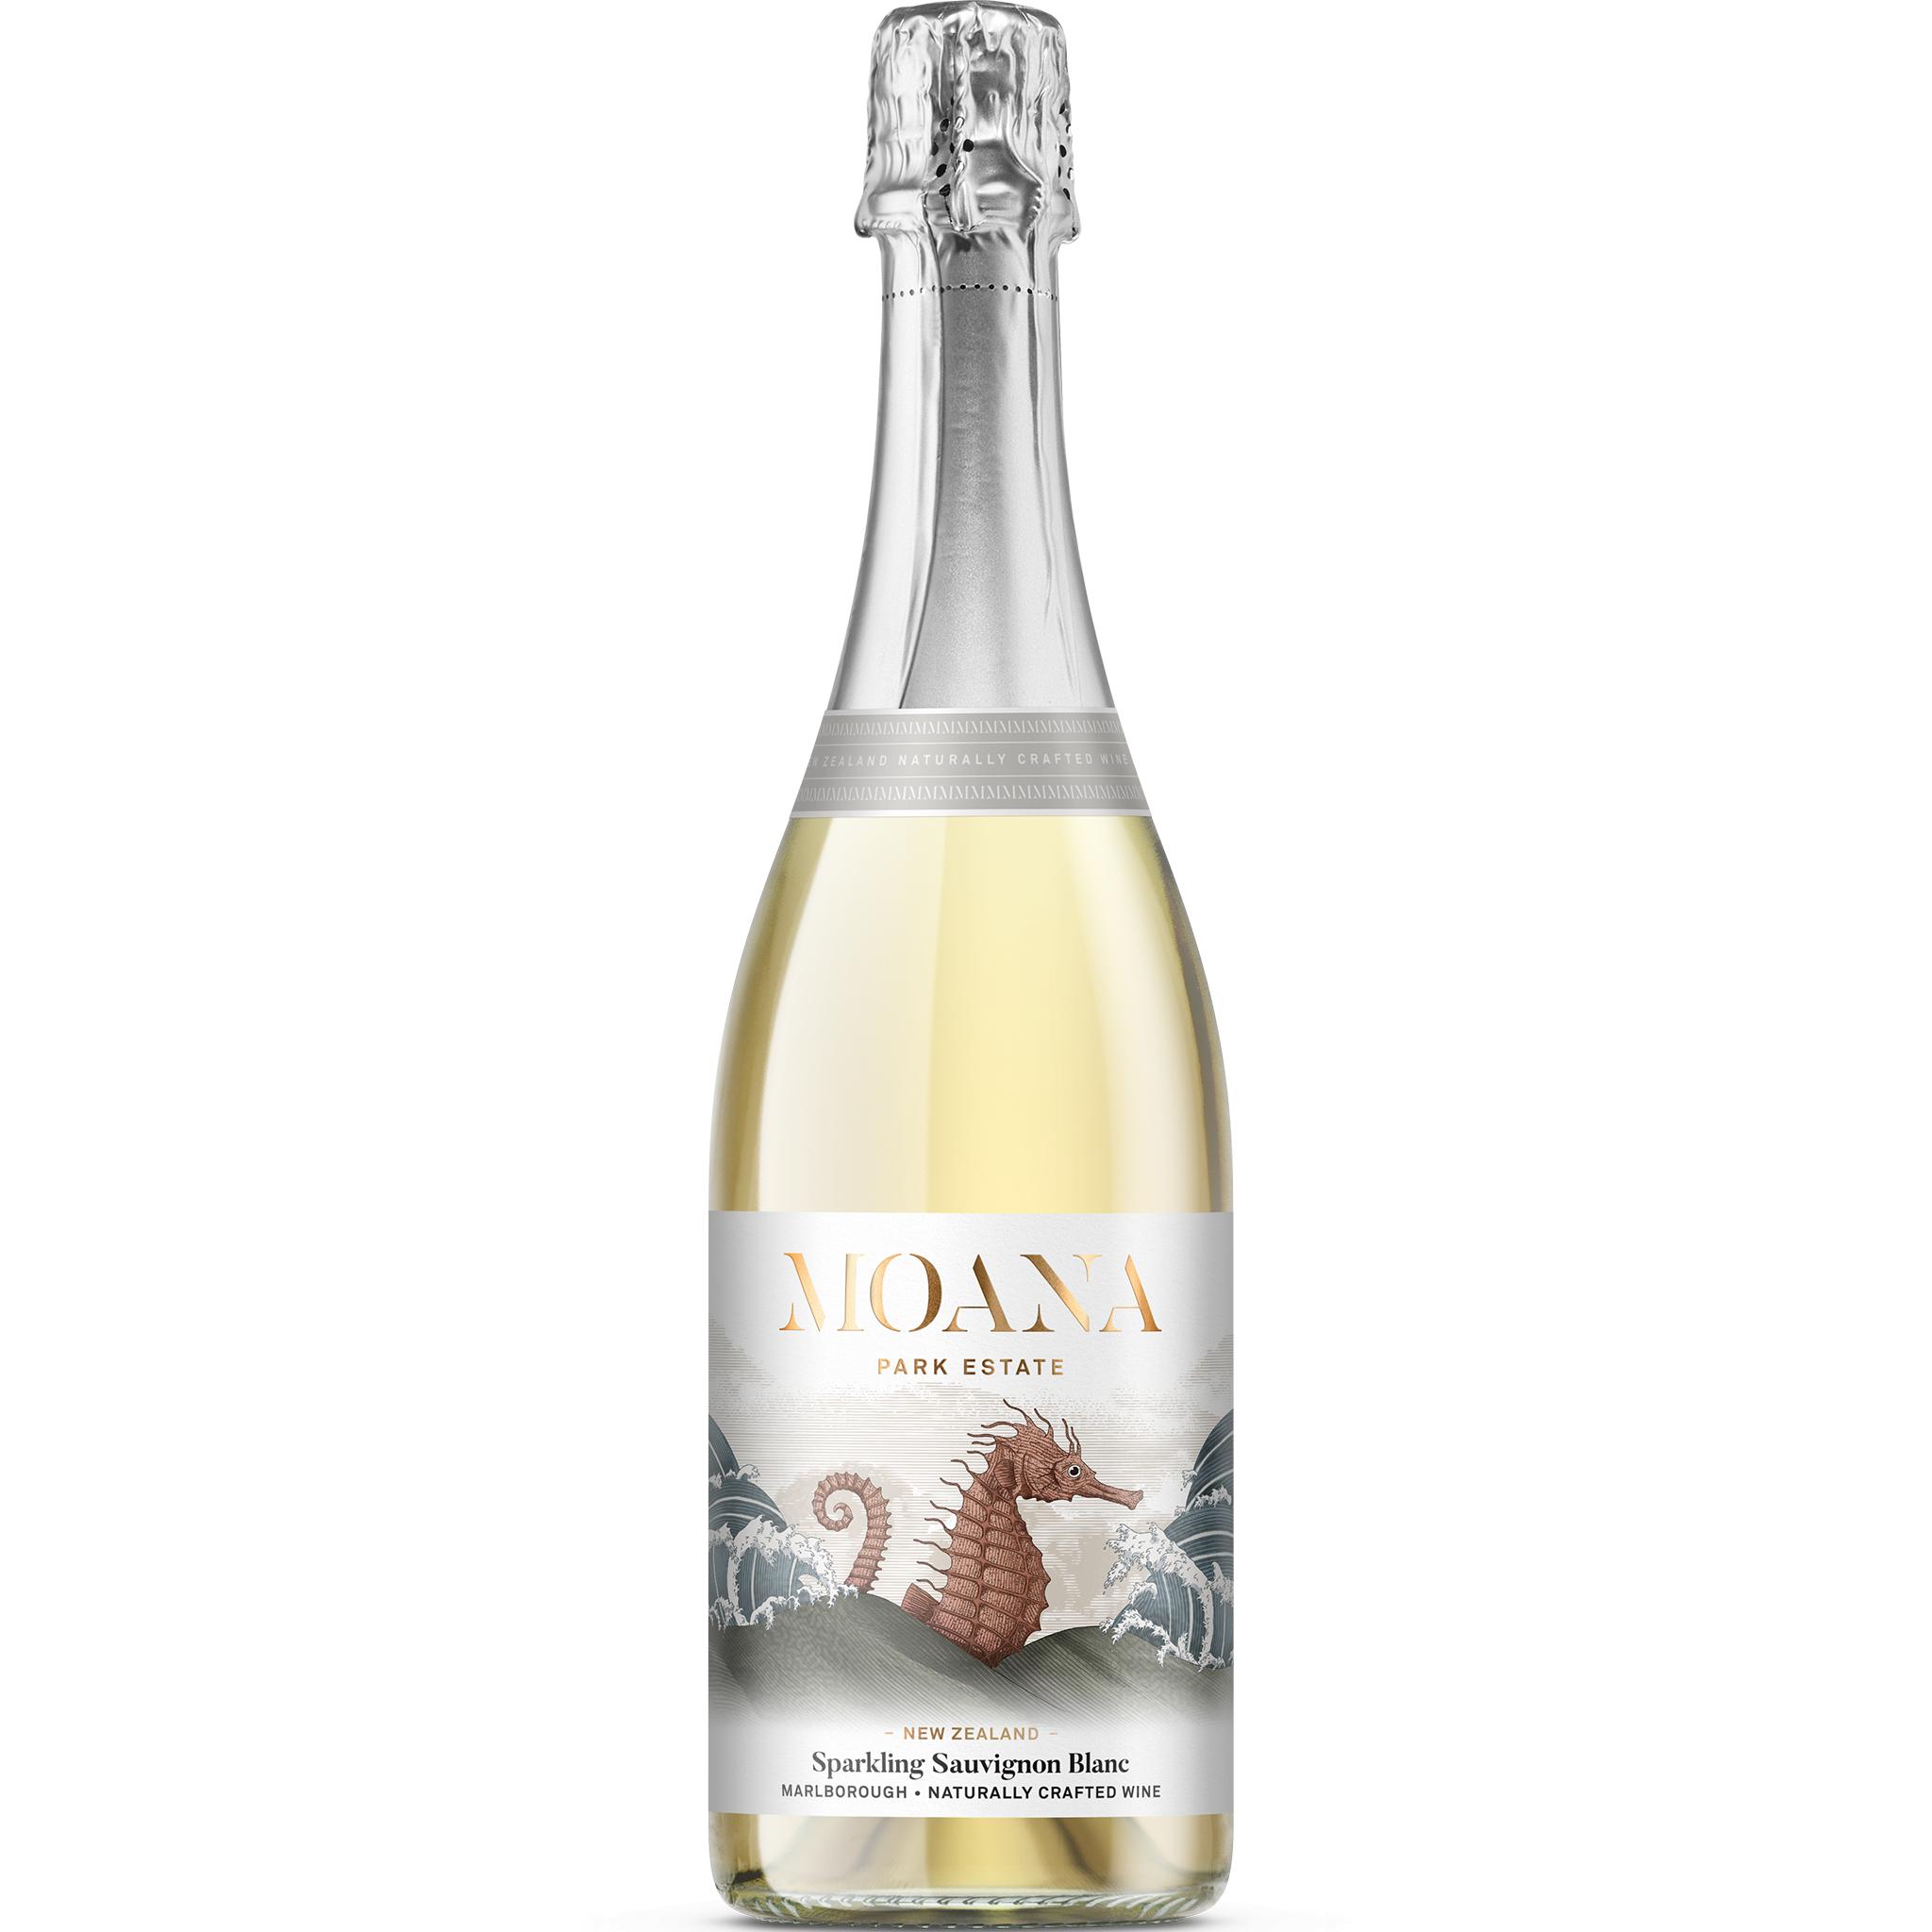 product image for Moana Park Estate Grower's Collection Sparkling Sauvignon Blanc NV | Case of 6